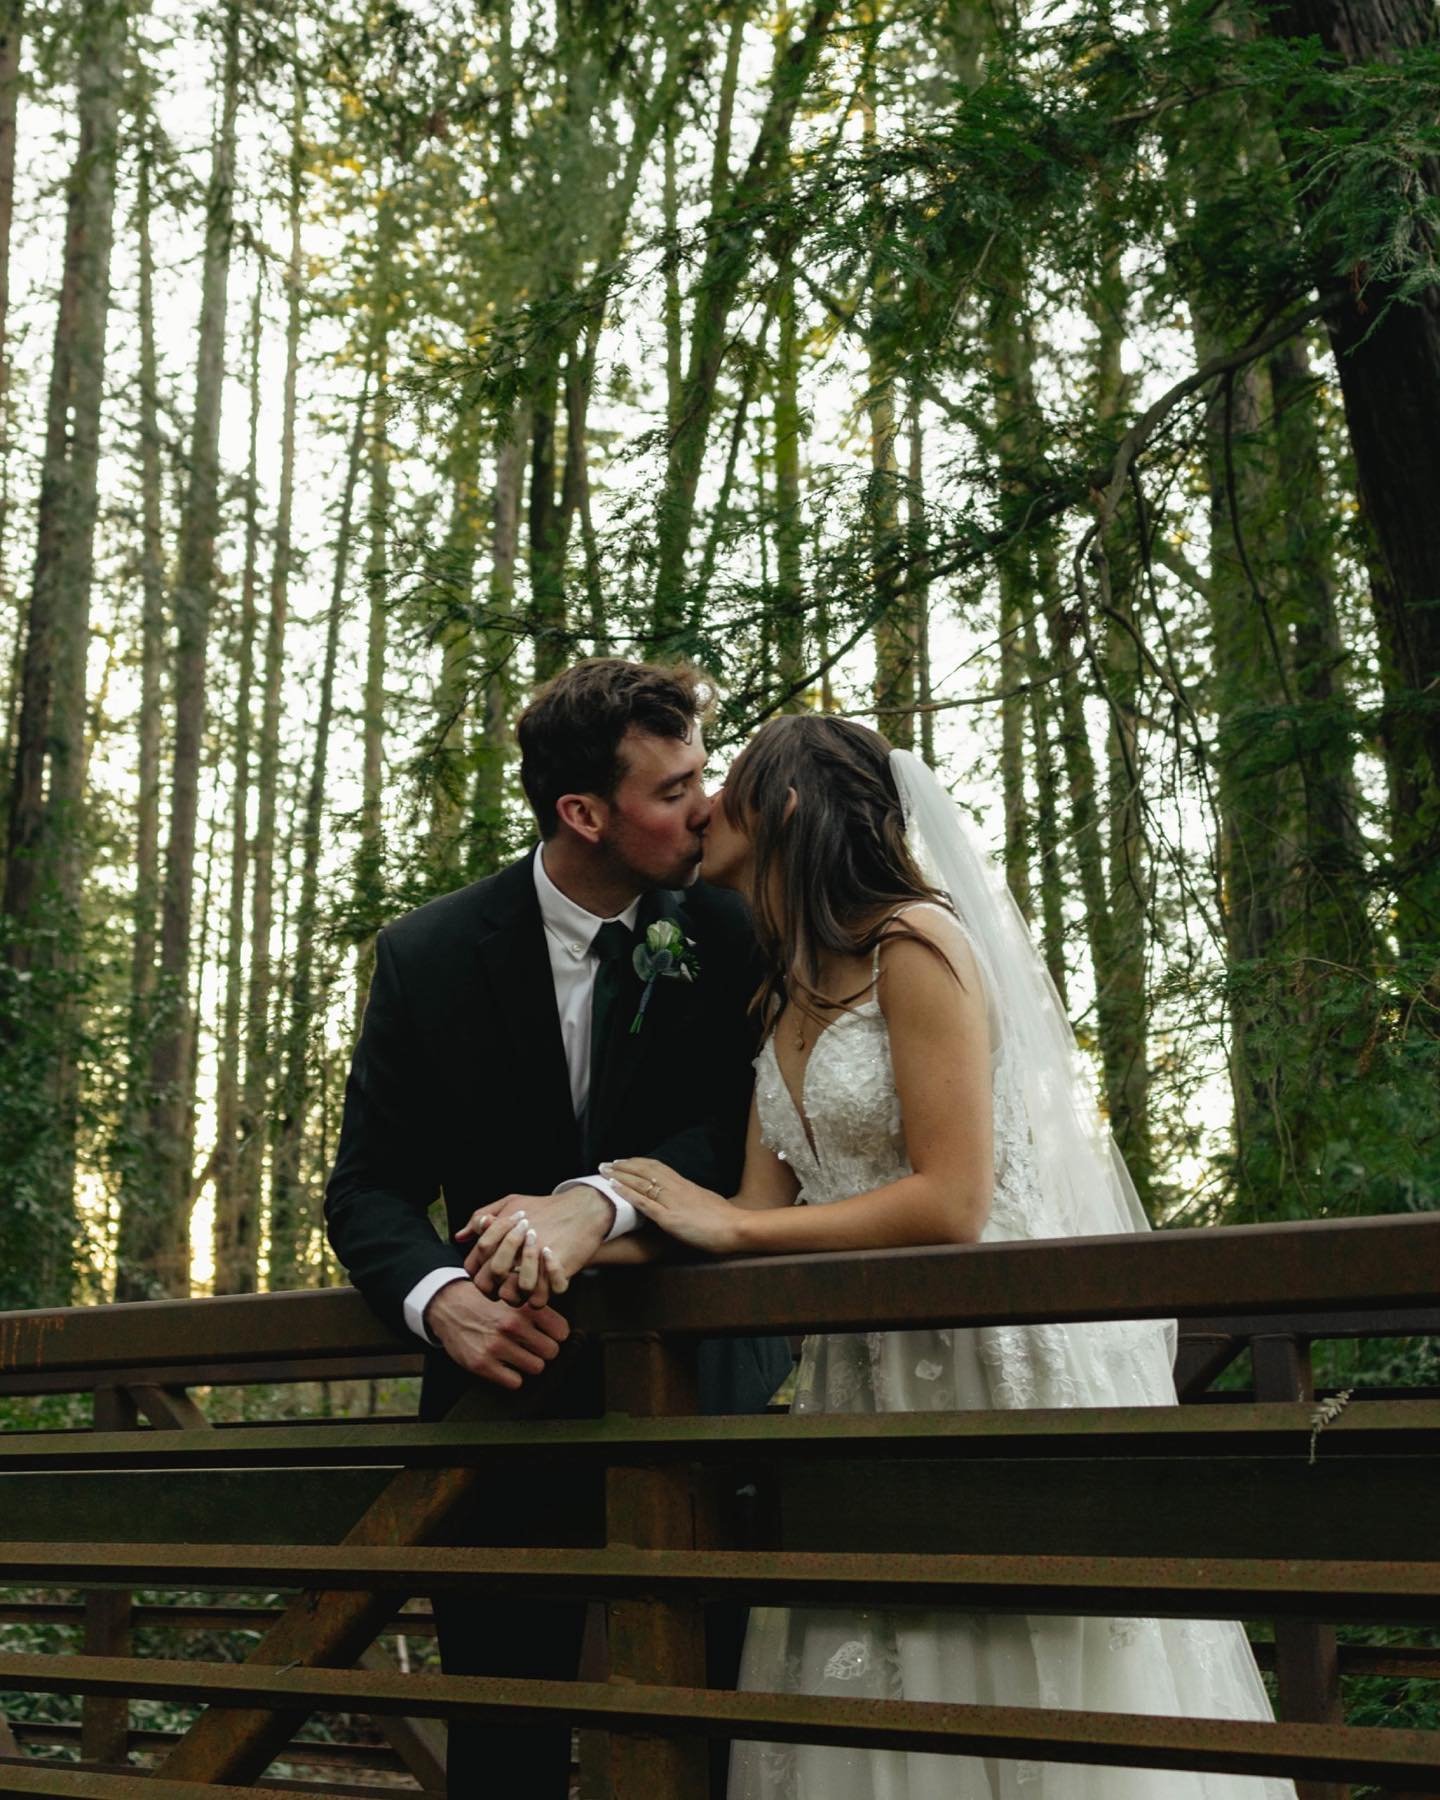 run away and get married in the forest 🌲

i can&rsquo;t believe this was over a year ago&hellip;and i never really shared these photos anywhere. But what better way to celebrate Makenna &amp; Gabe than by sharing these beautiful memories! 

i always